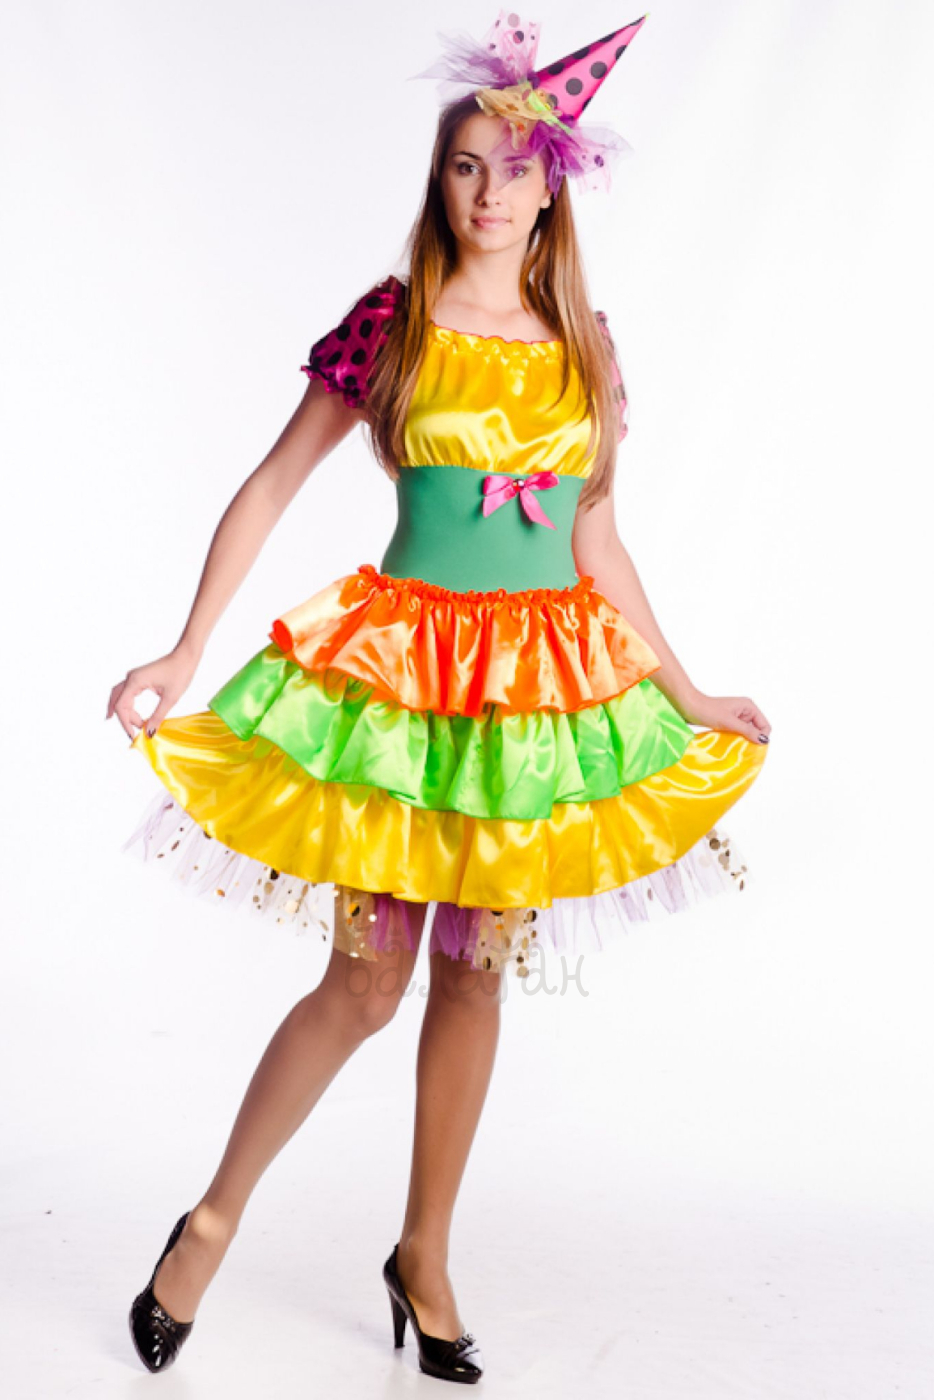 Clown funny dress red nose costume for woman